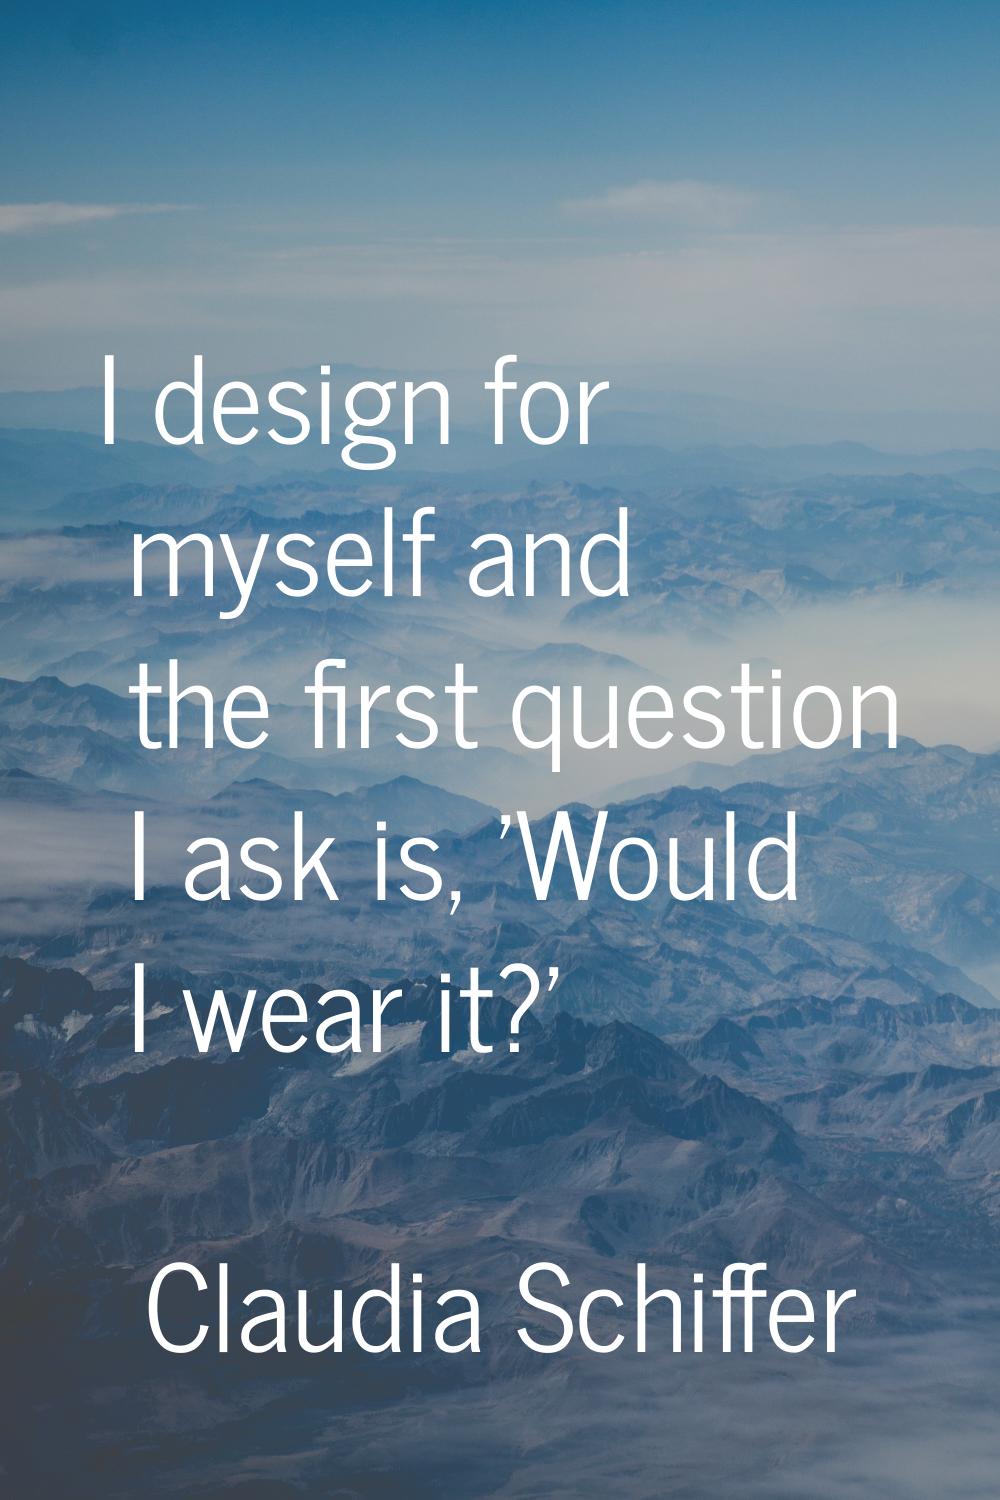 I design for myself and the first question I ask is, 'Would I wear it?'